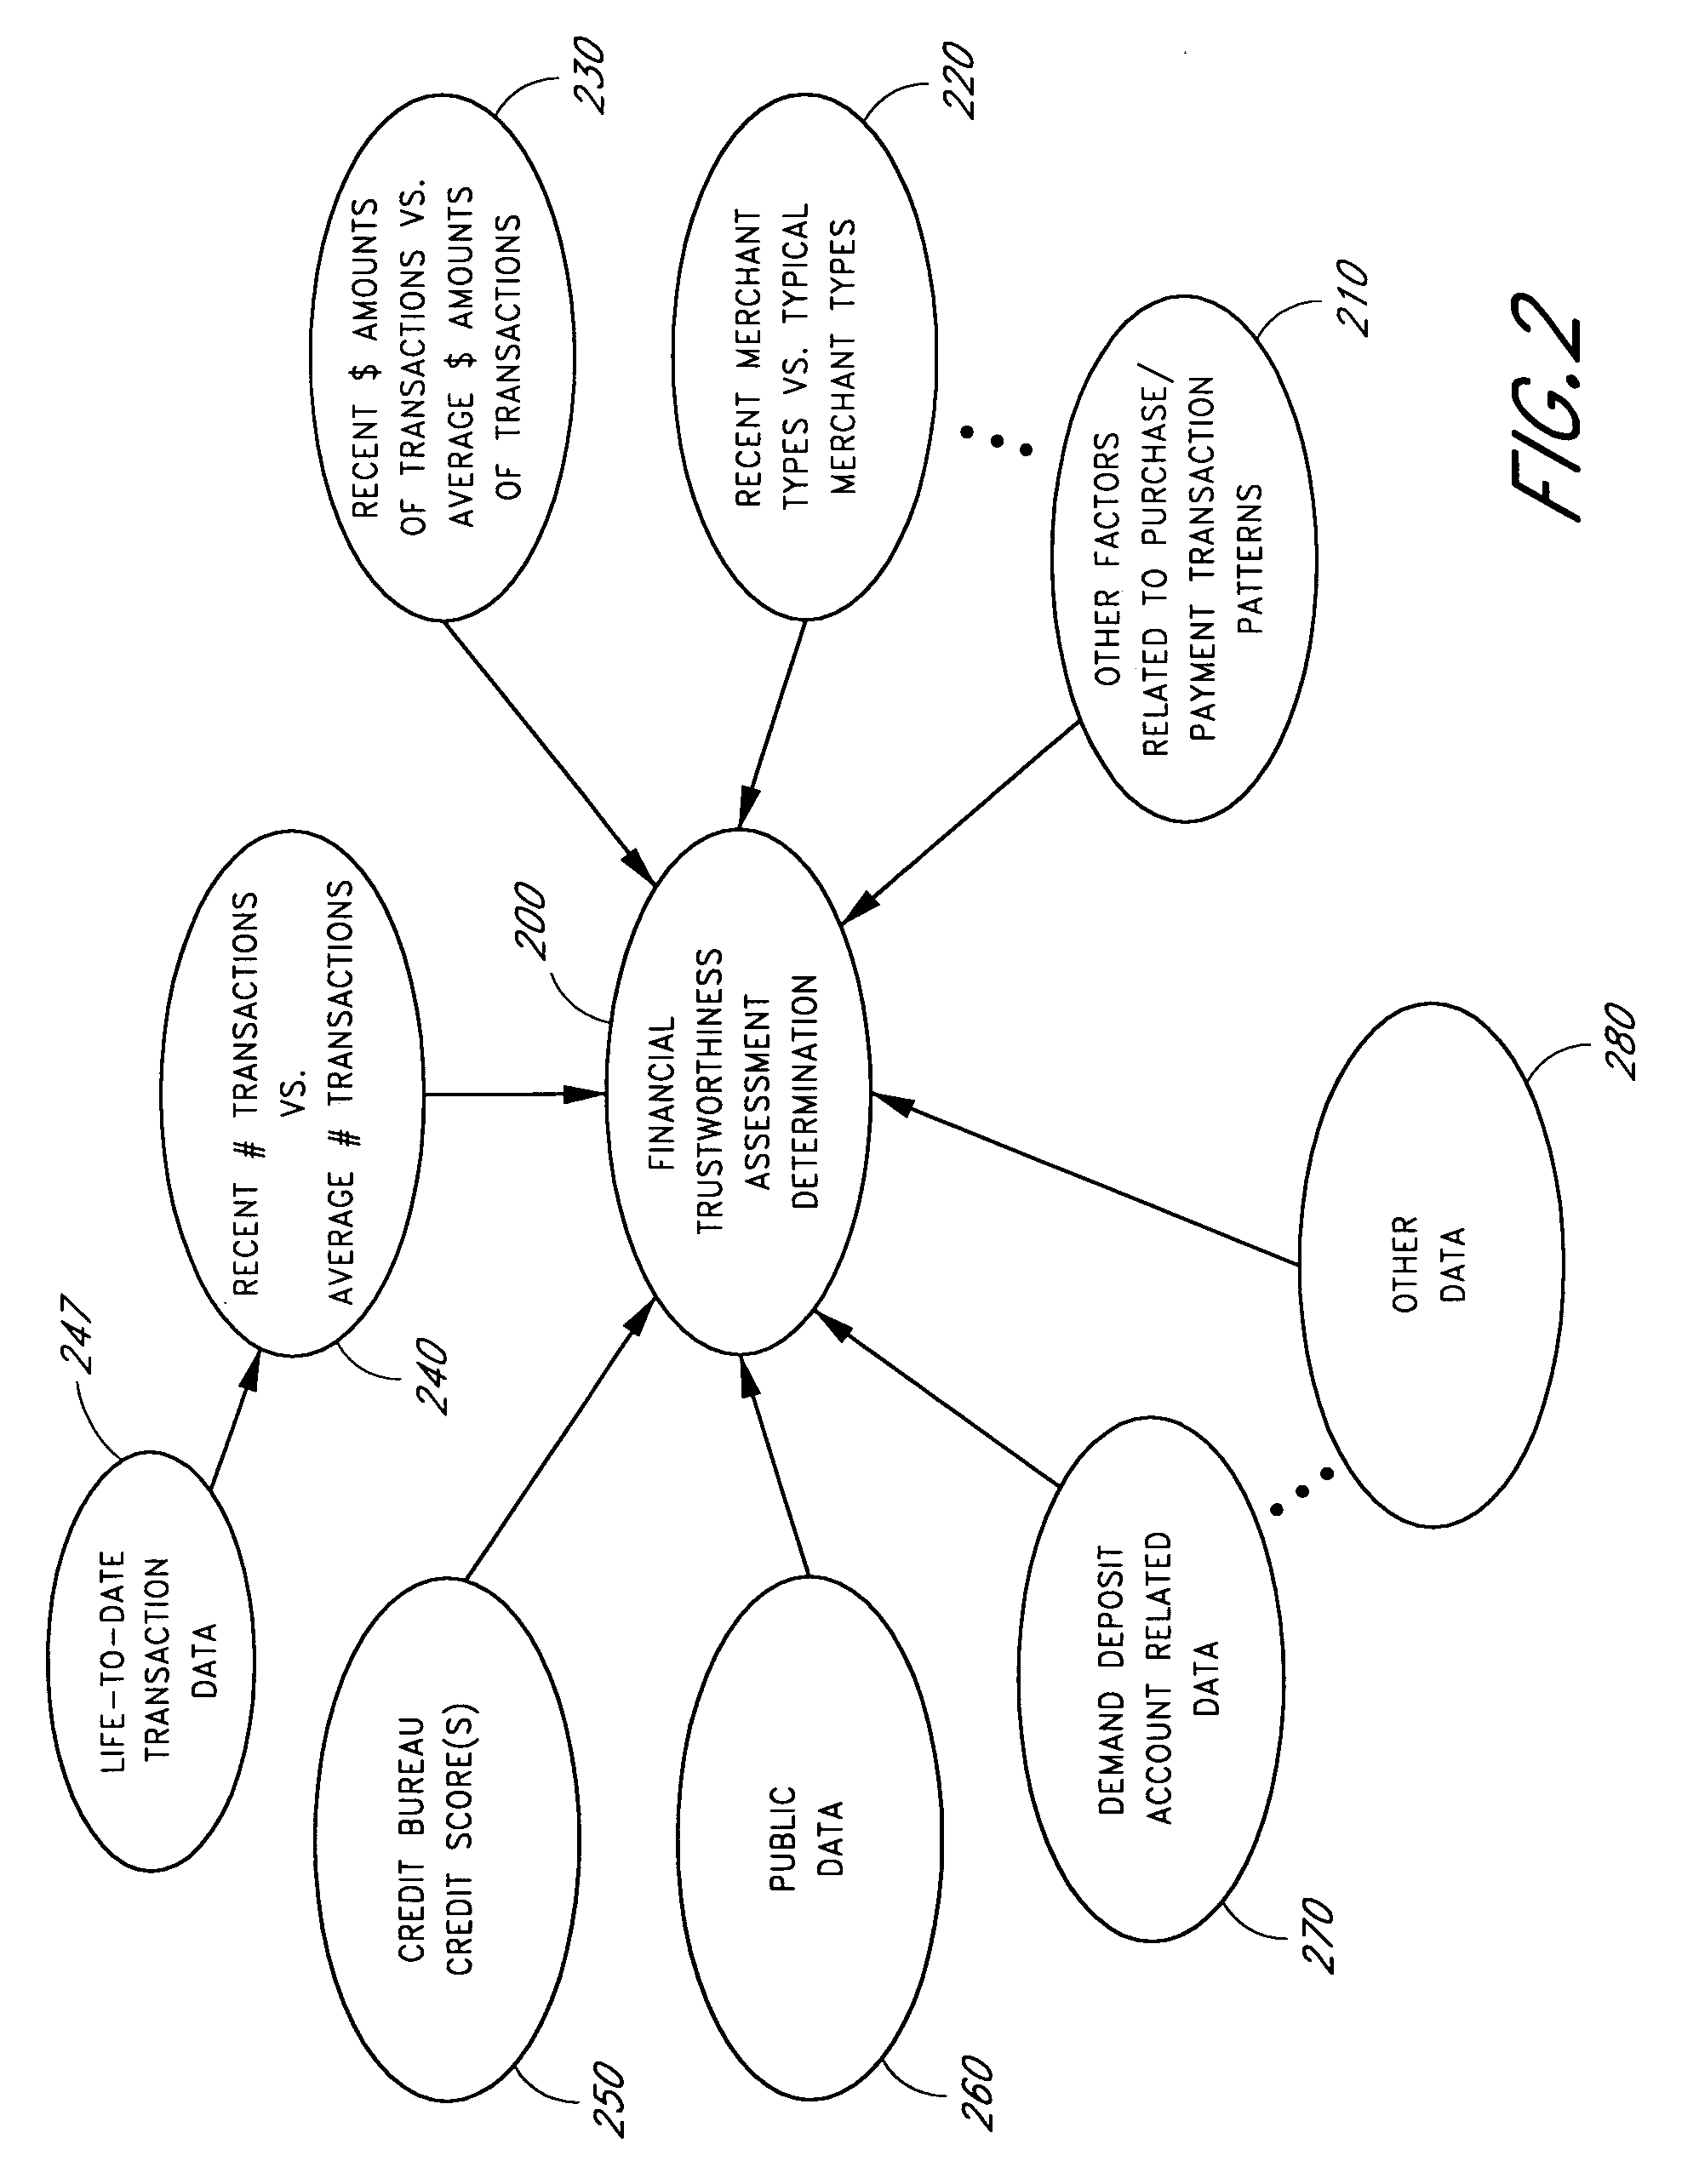 Systems and methods for performing a financial trustworthiness assessment